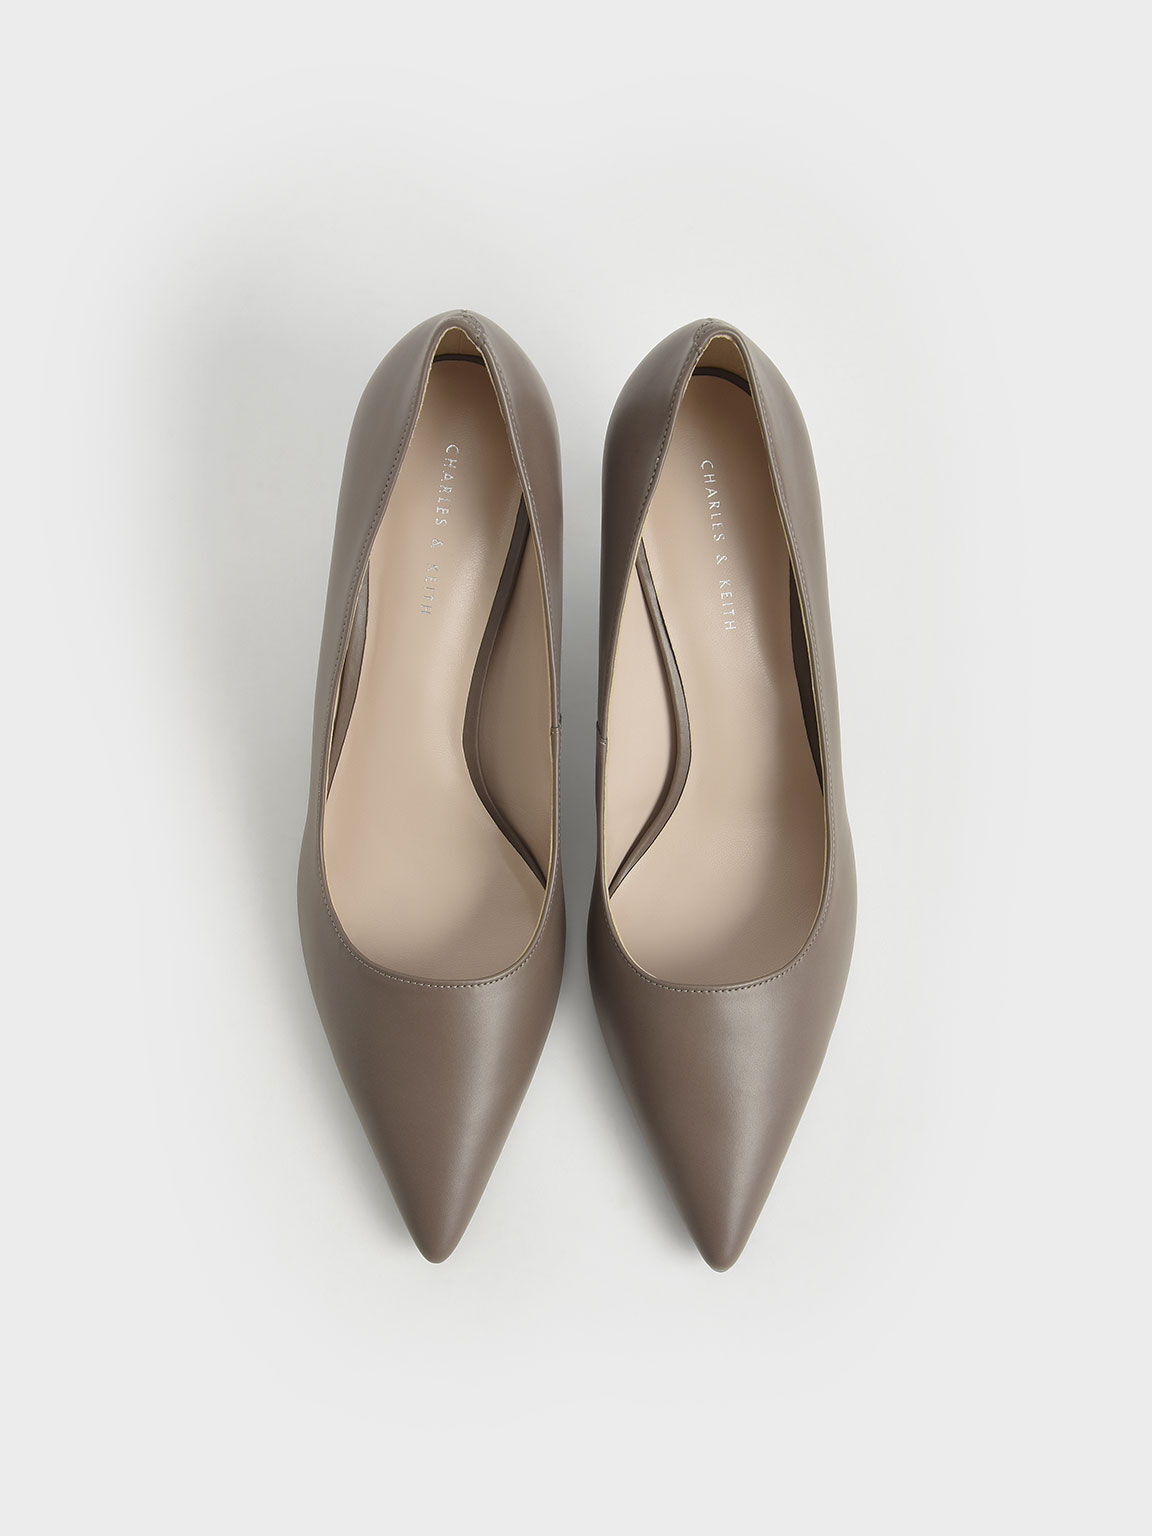 Mid Heel Pointed Toe Pumps, Taupe, hi-res